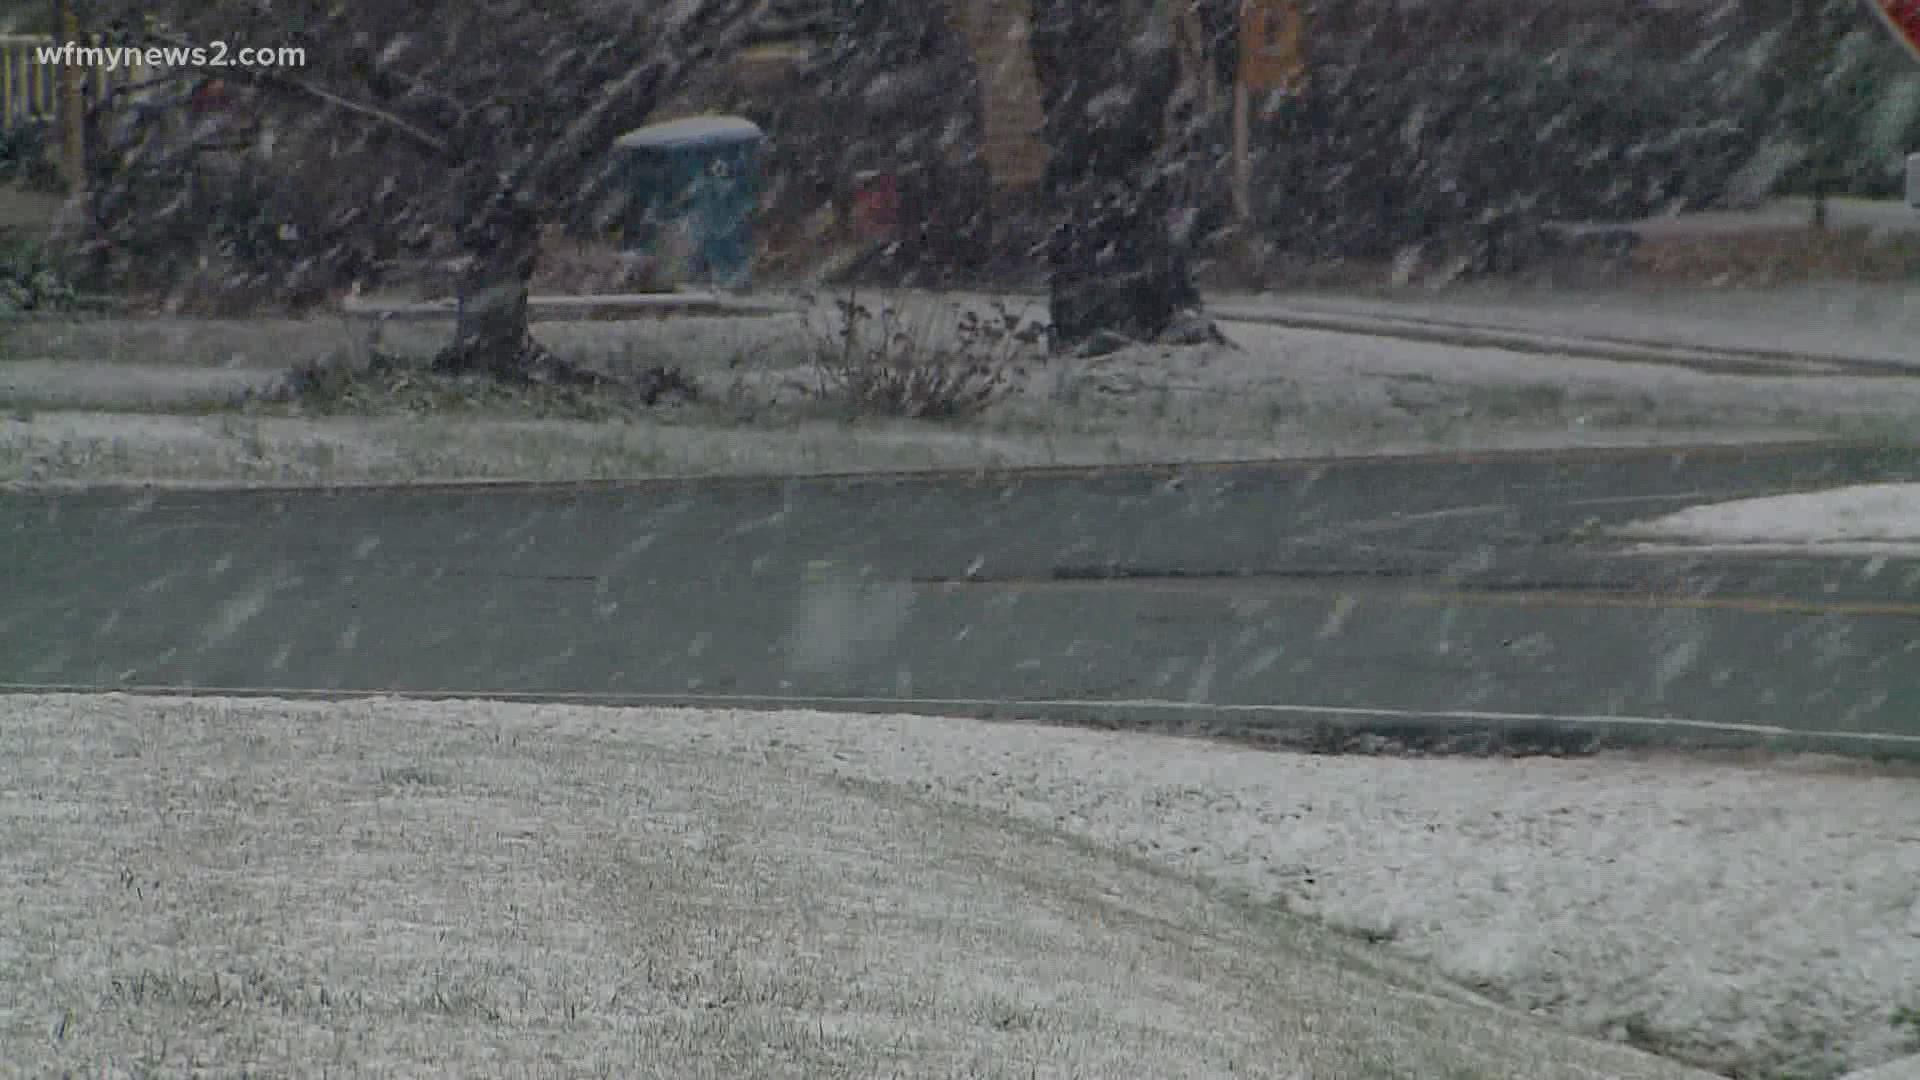 Big flakes fell Friday afternoon. Officials warned roads could be slick heading into the morning.